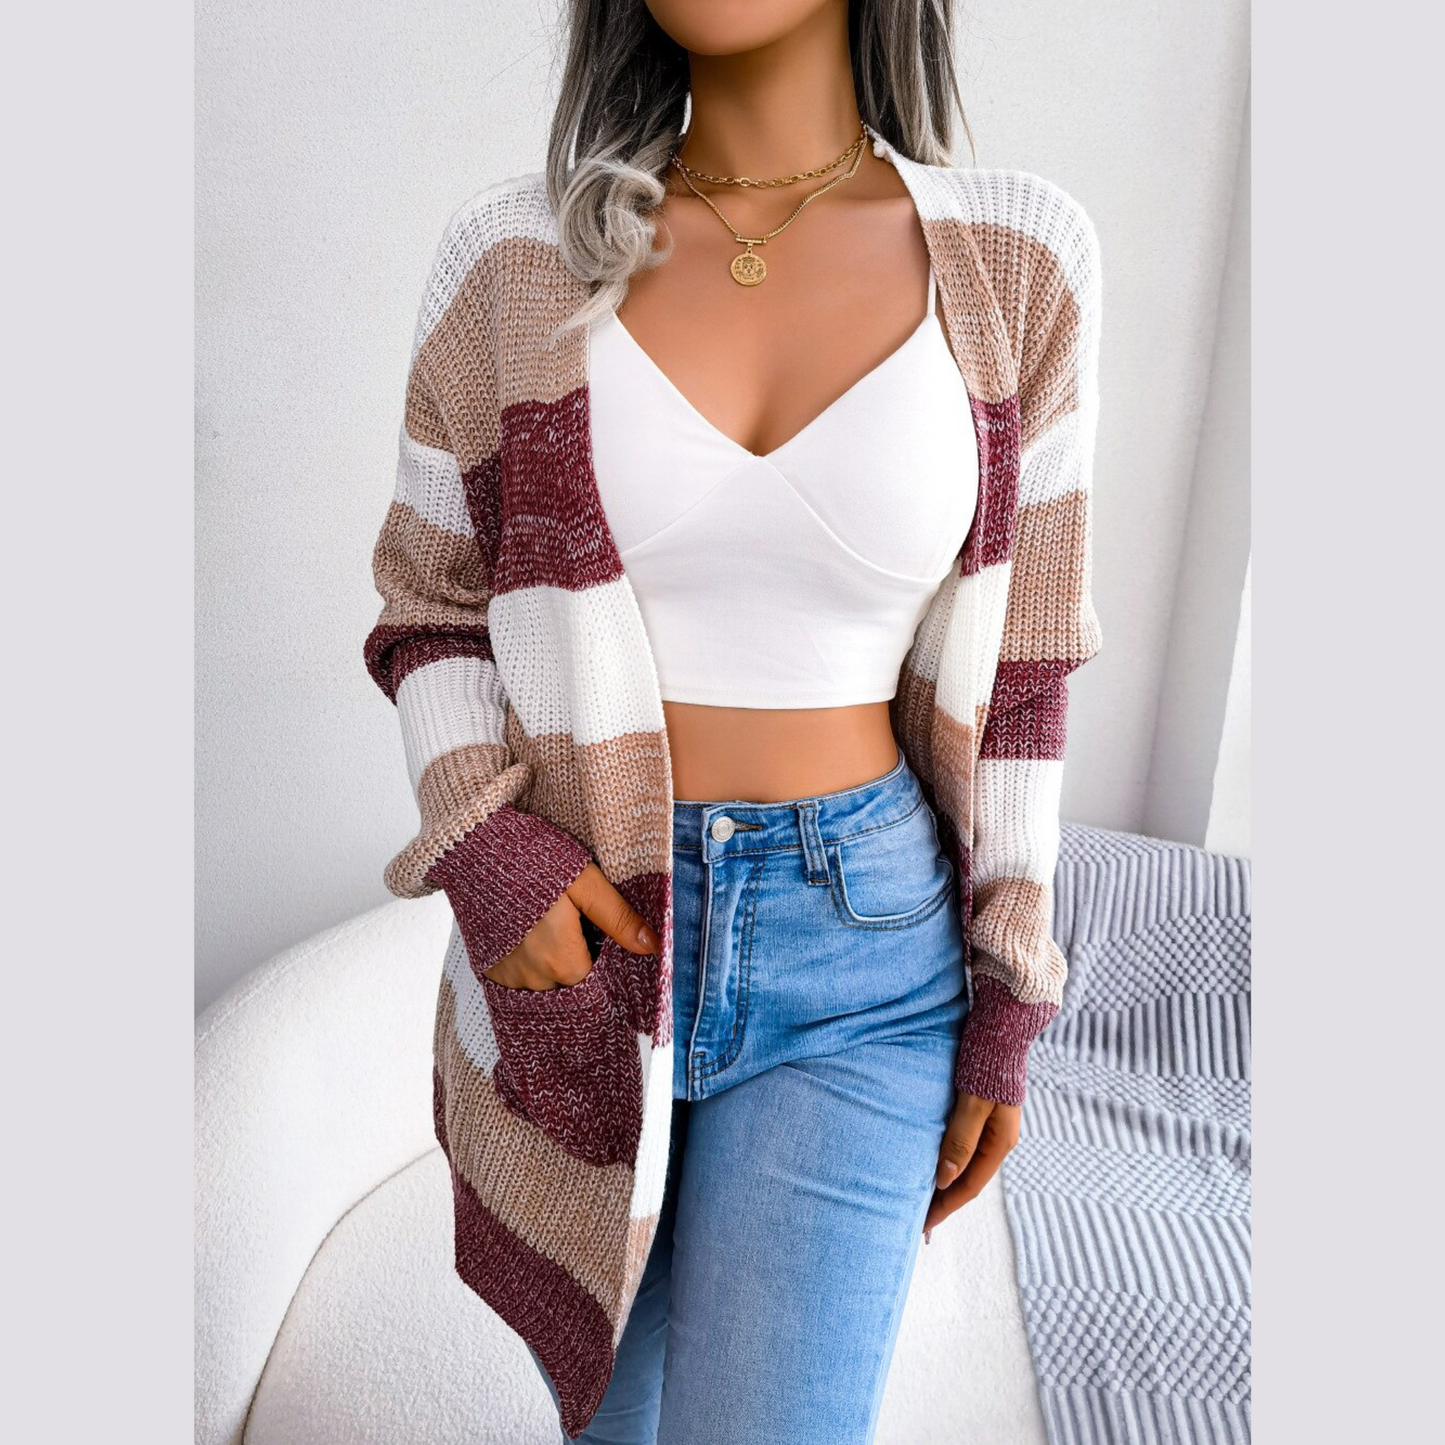 Emily - Burgundy & White Knitted Striped Open Cardigan